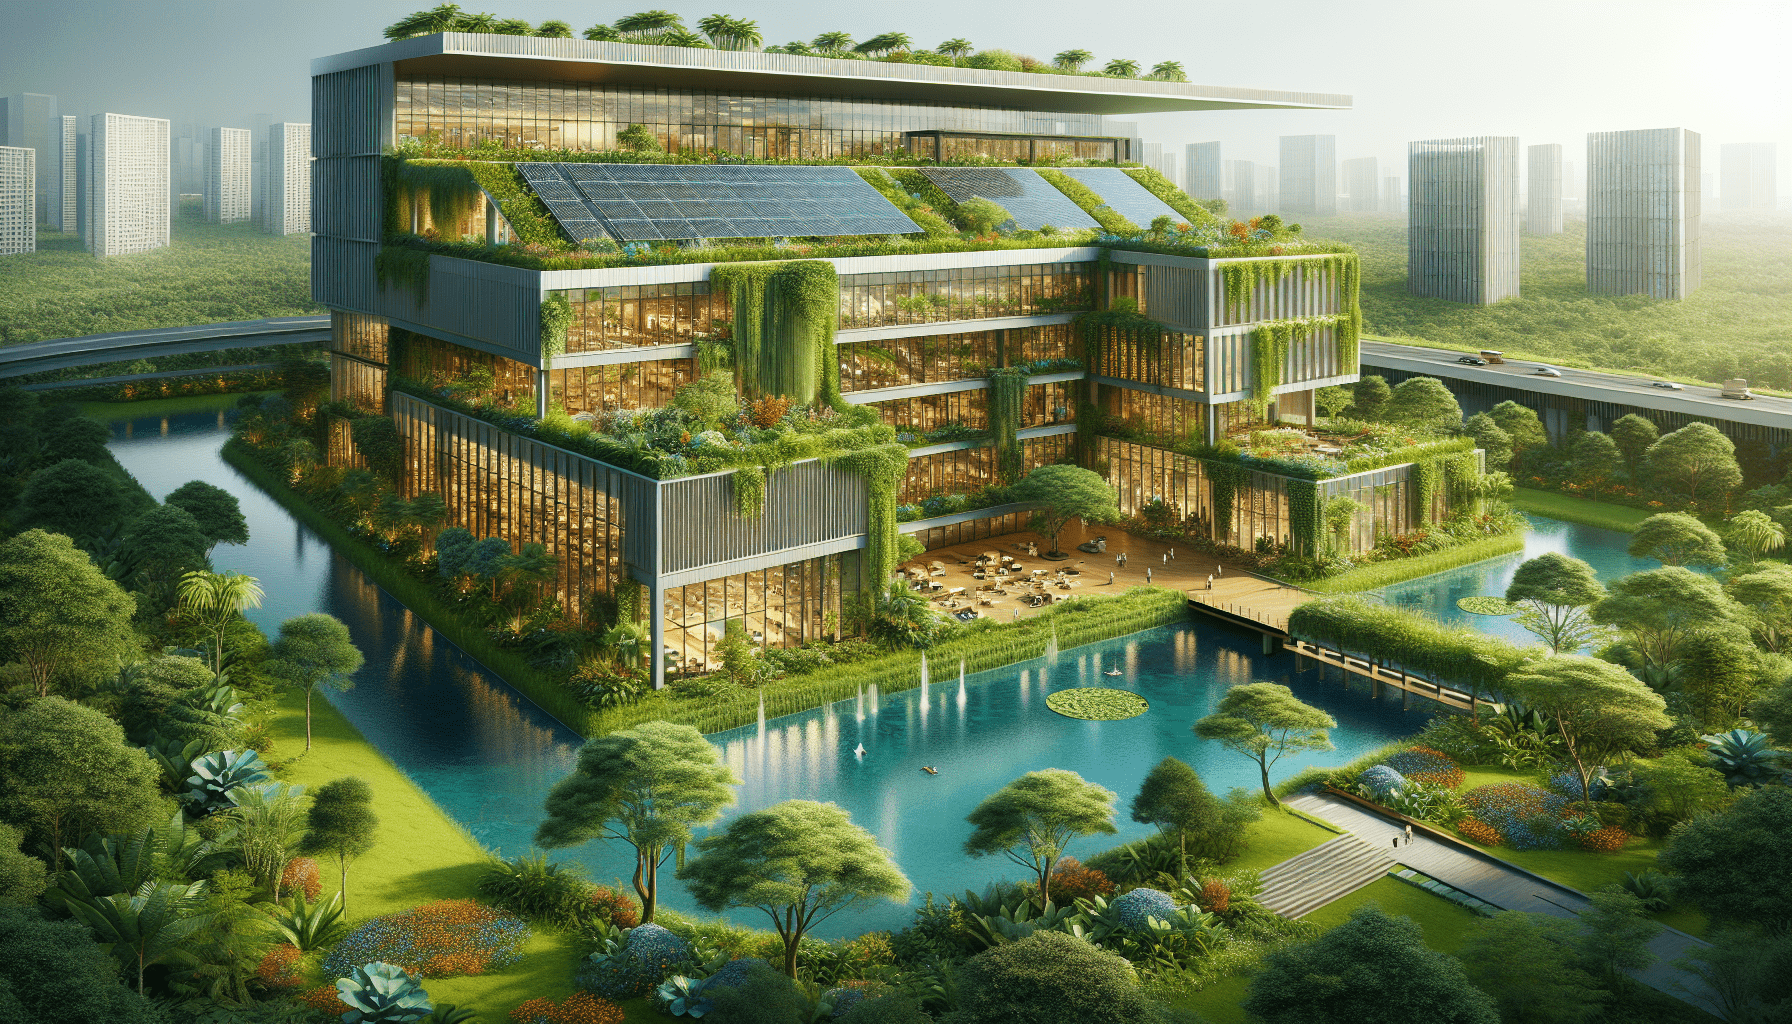 What Are The Best Sustainable Architecture Practices?